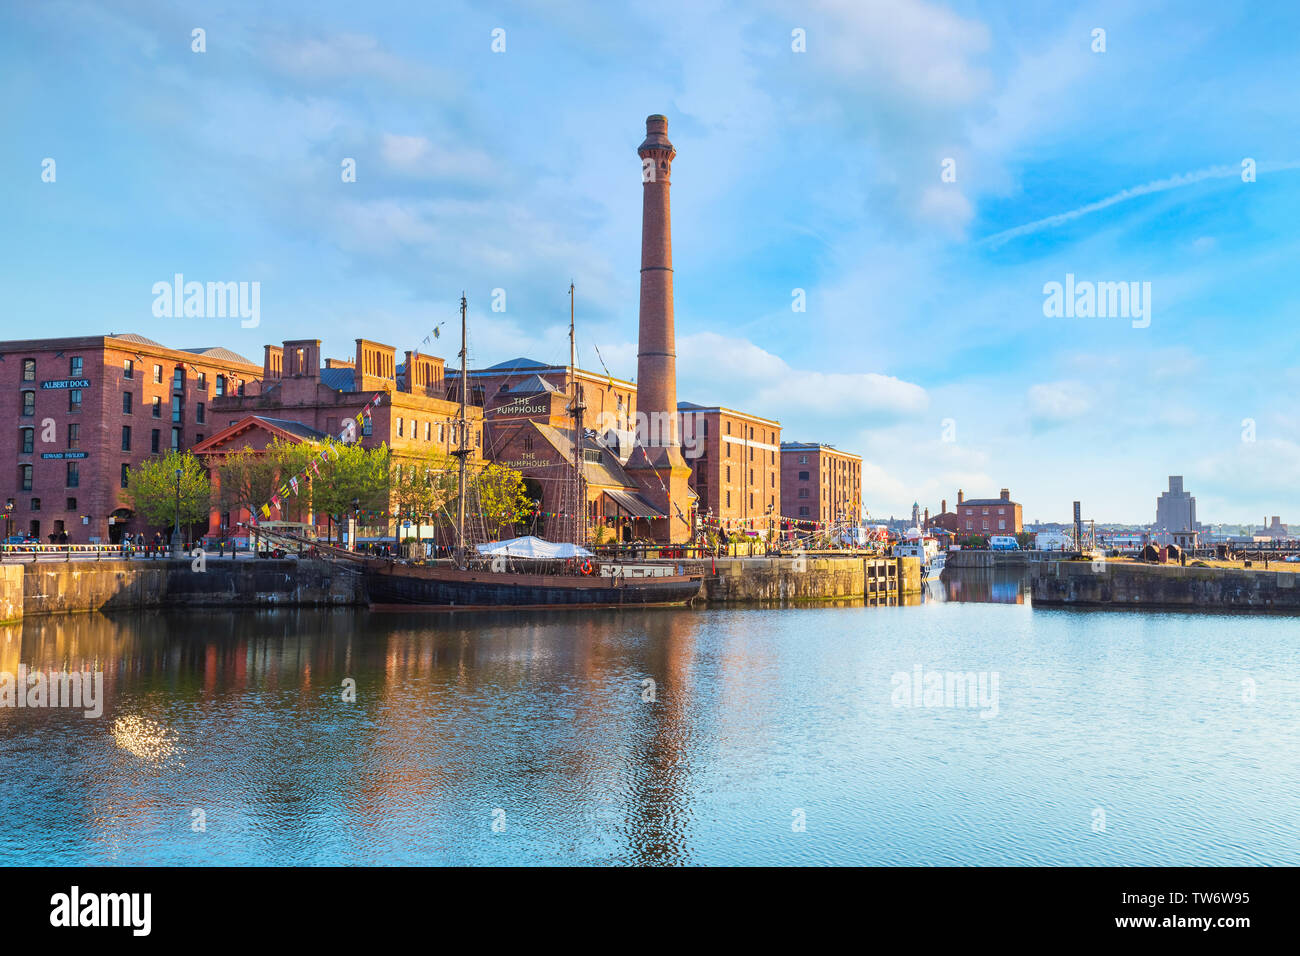 Liverpool, UK - May 17 2018: Royal Albert Dock is a complex of dock buildings and warehouses opened in 1846, today it's a major tourist attraction in Stock Photo